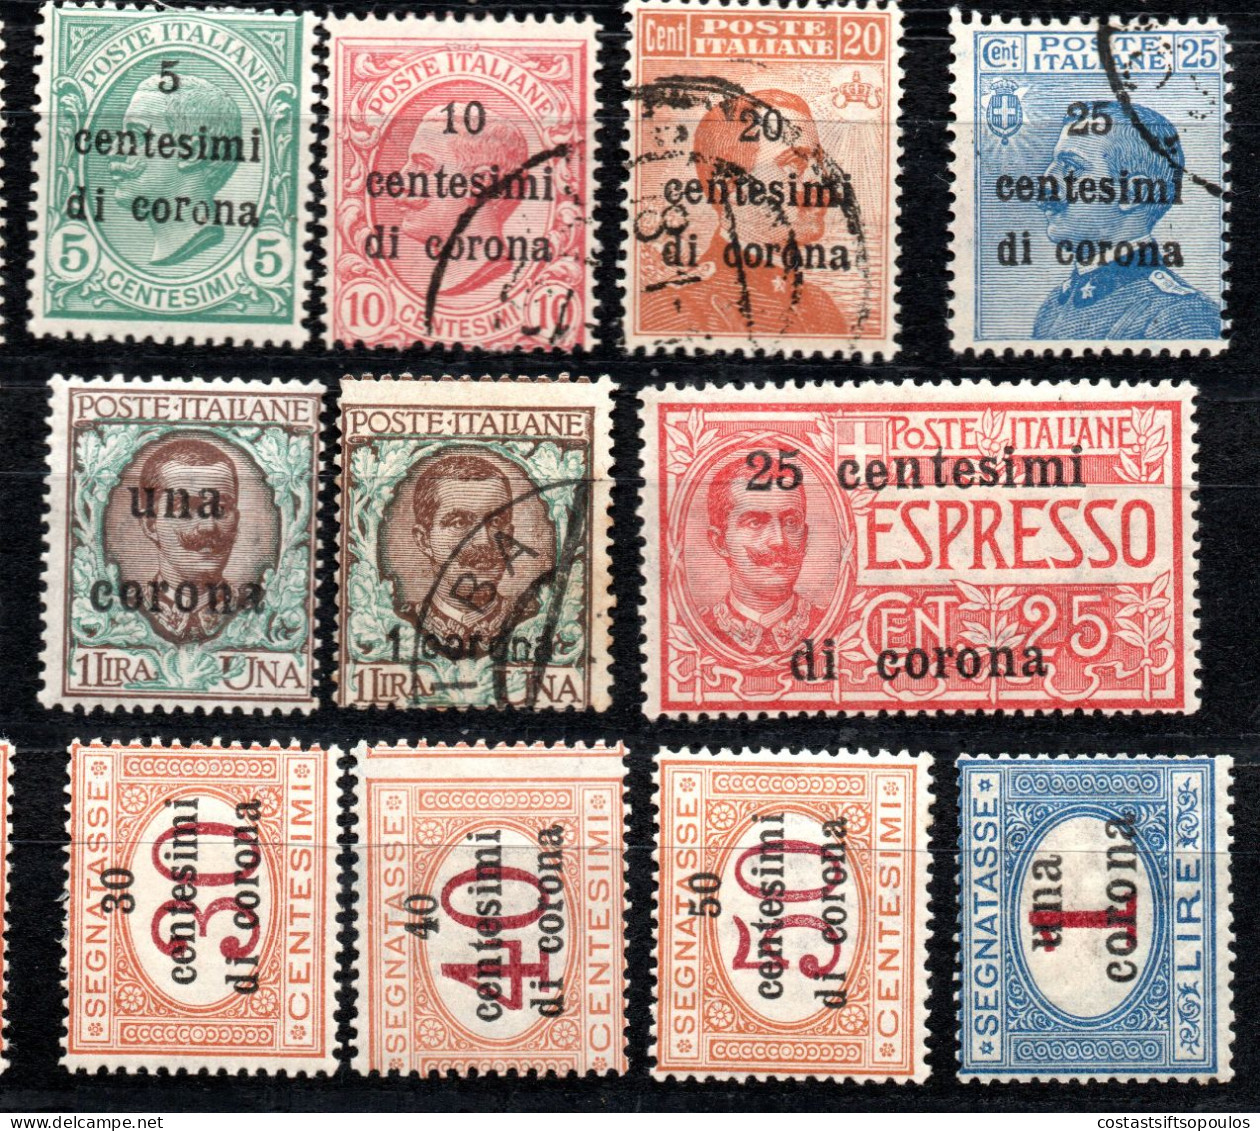 2145.AUSTRIA. ITALY. TRENTINO 1919-1920 41 ST. LOT.POSSIBLY SOME NOT GENUINE. GENERALLY GOOD CONDITION - Occupazione Austriaca